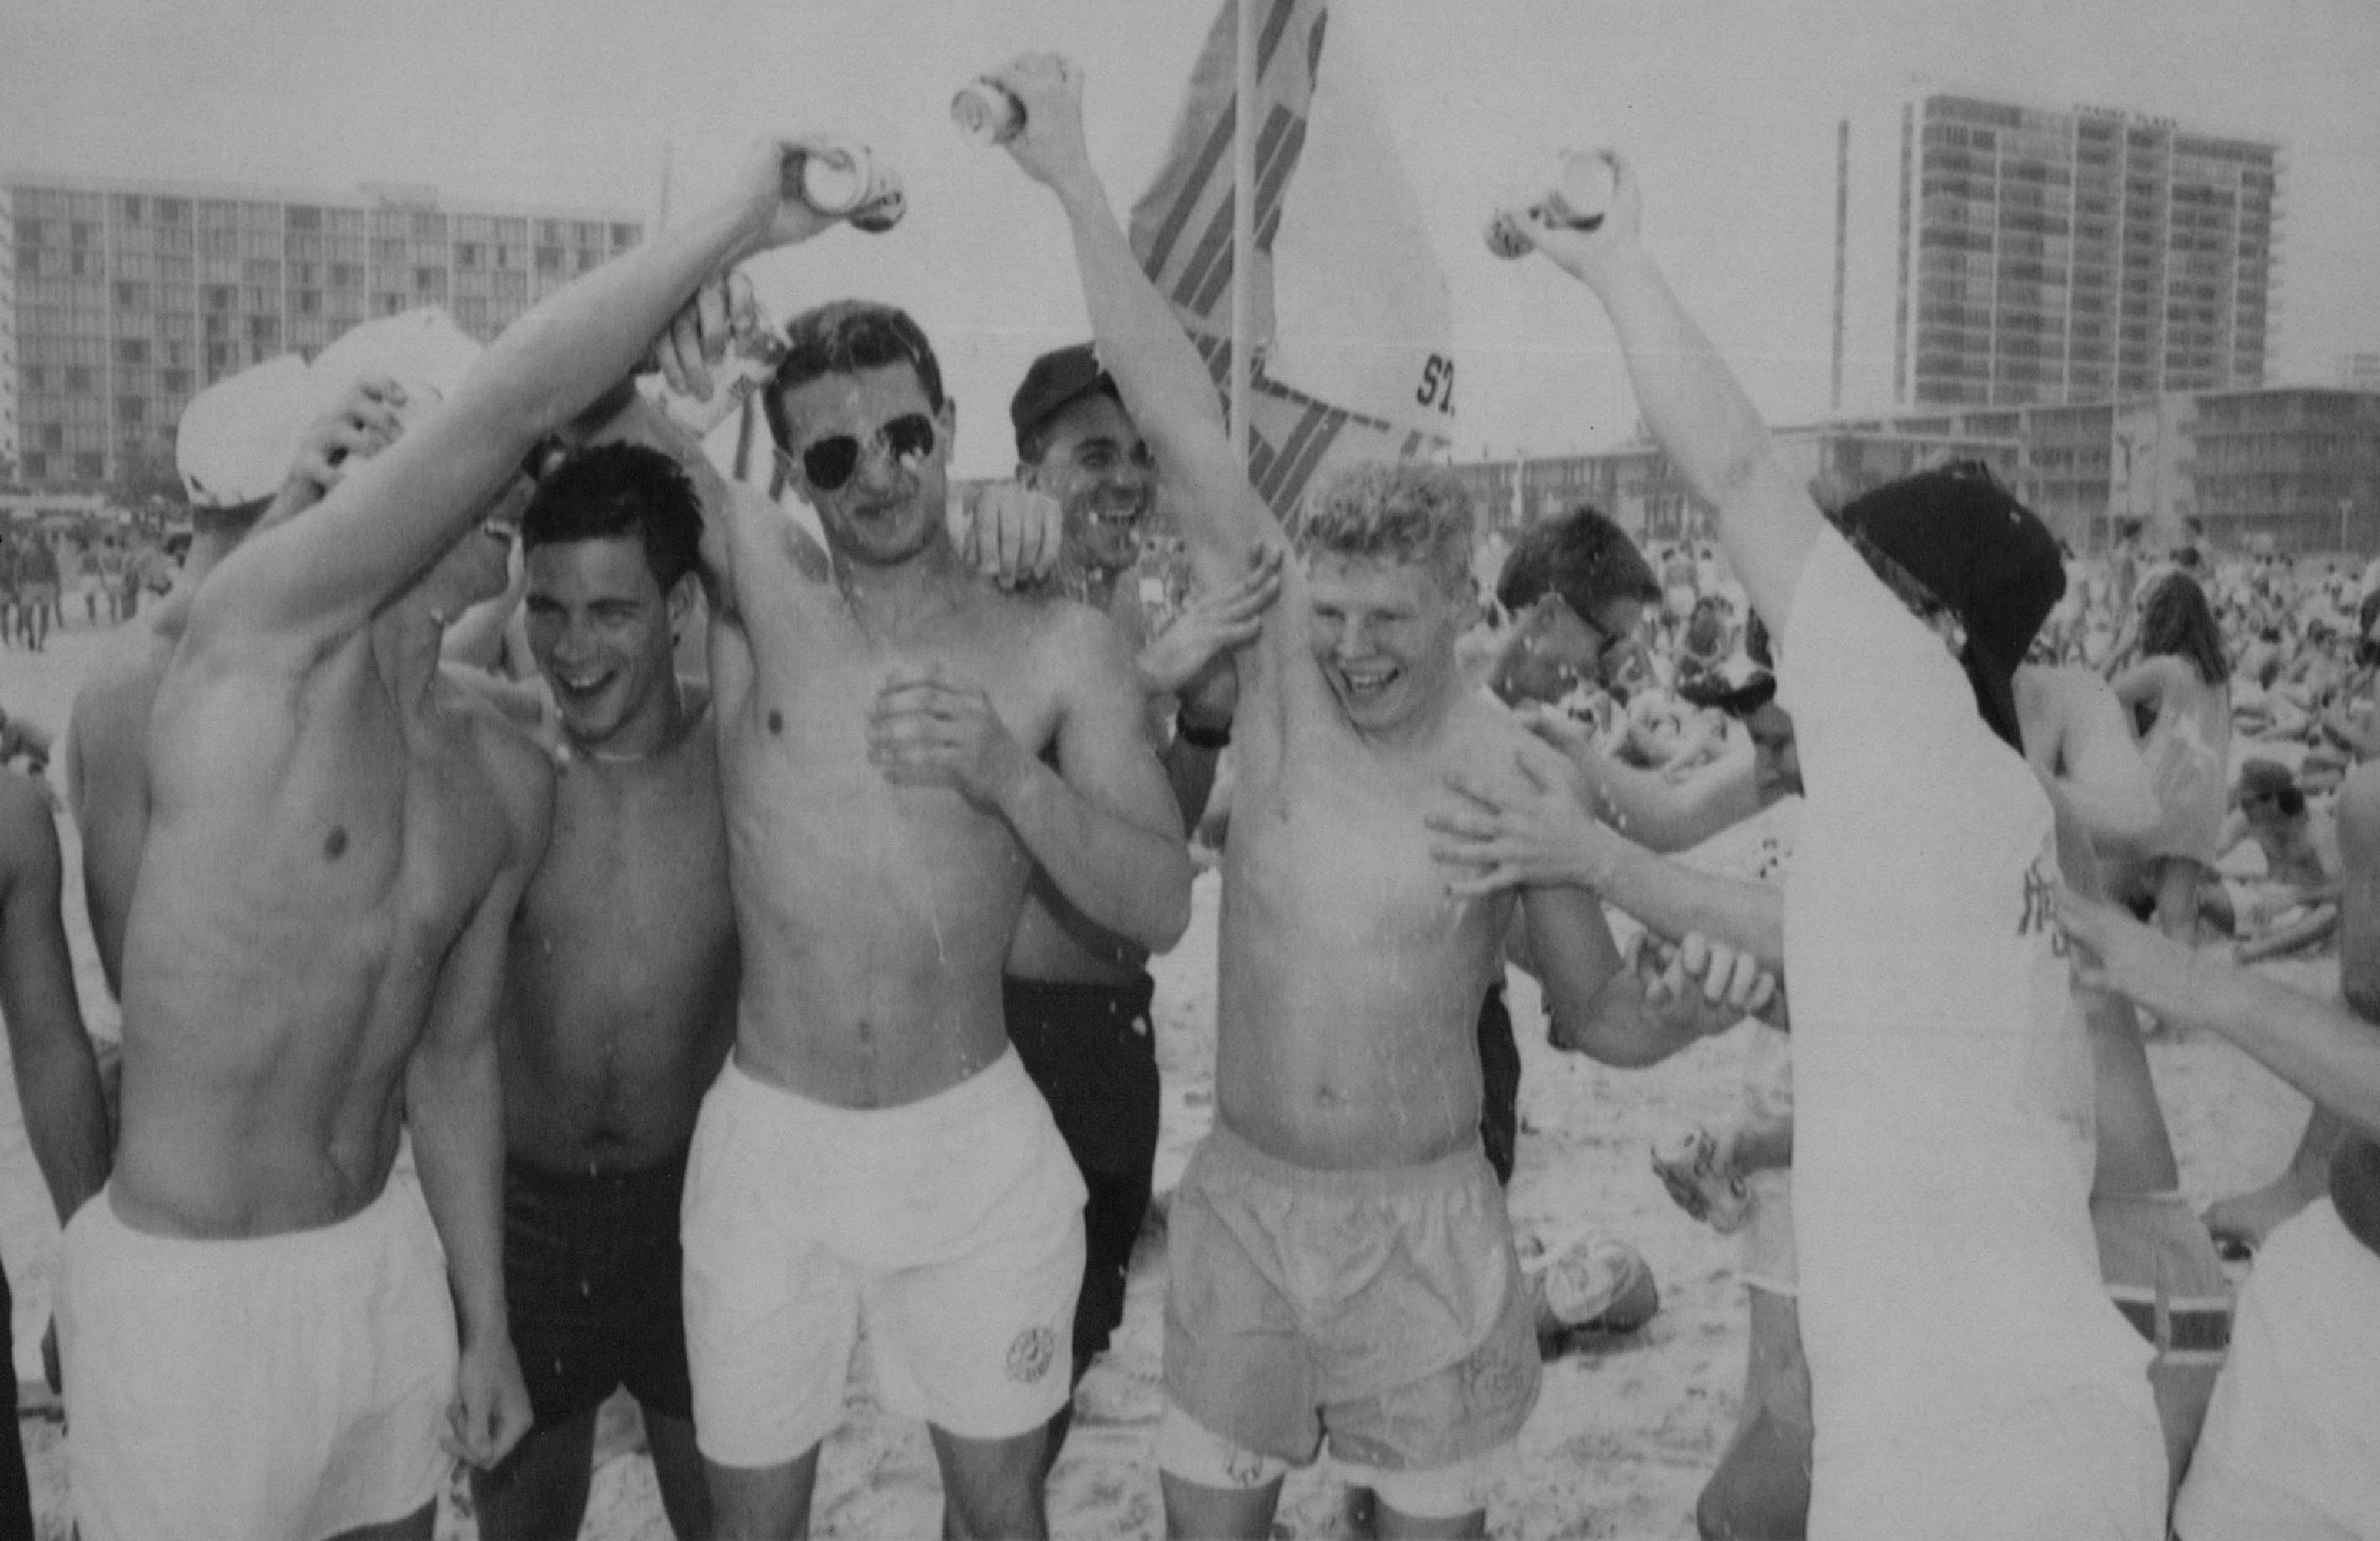 a group of shirtless young men pour beer all over each other on a beach with buildings behind them 